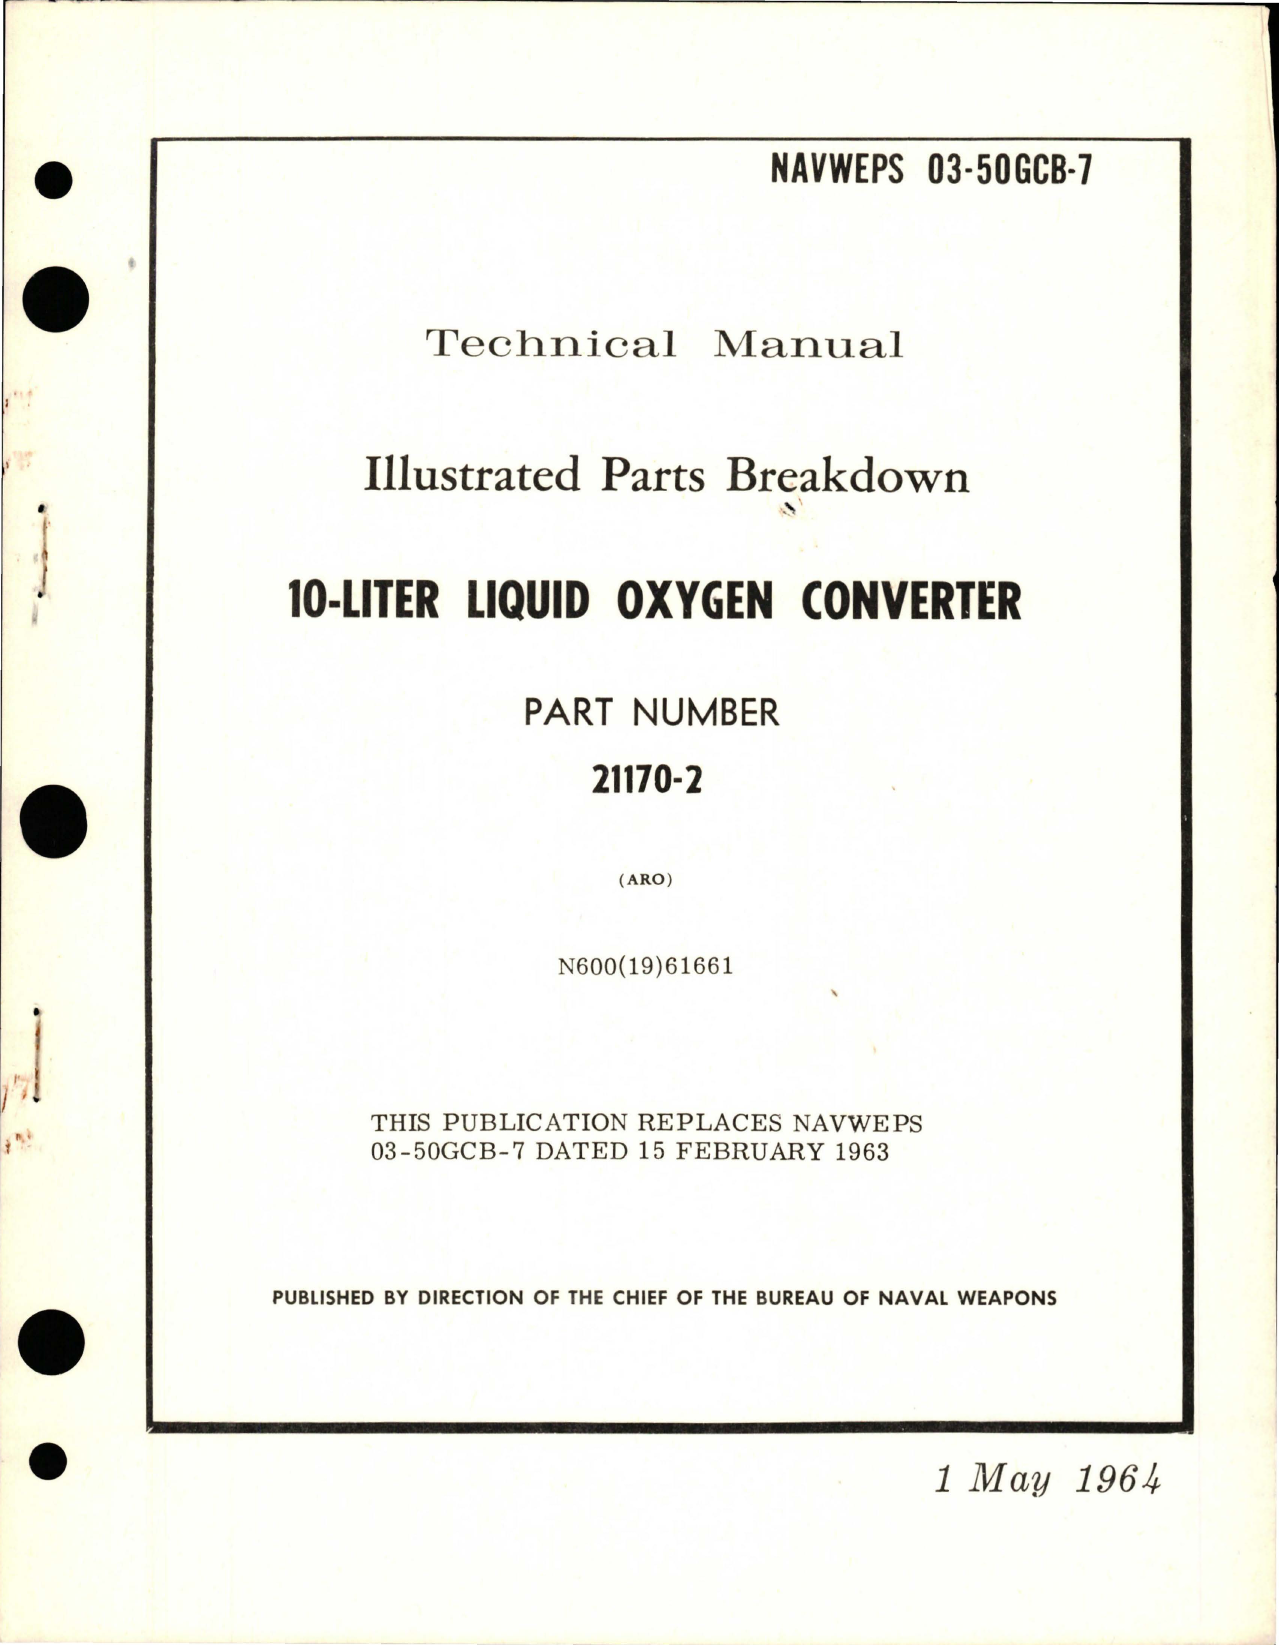 Sample page 1 from AirCorps Library document: Illustrated Parts for Illustrated Parts Breakdown for 10-Liter Liquid Oxygen Converter - Part 21170-2 